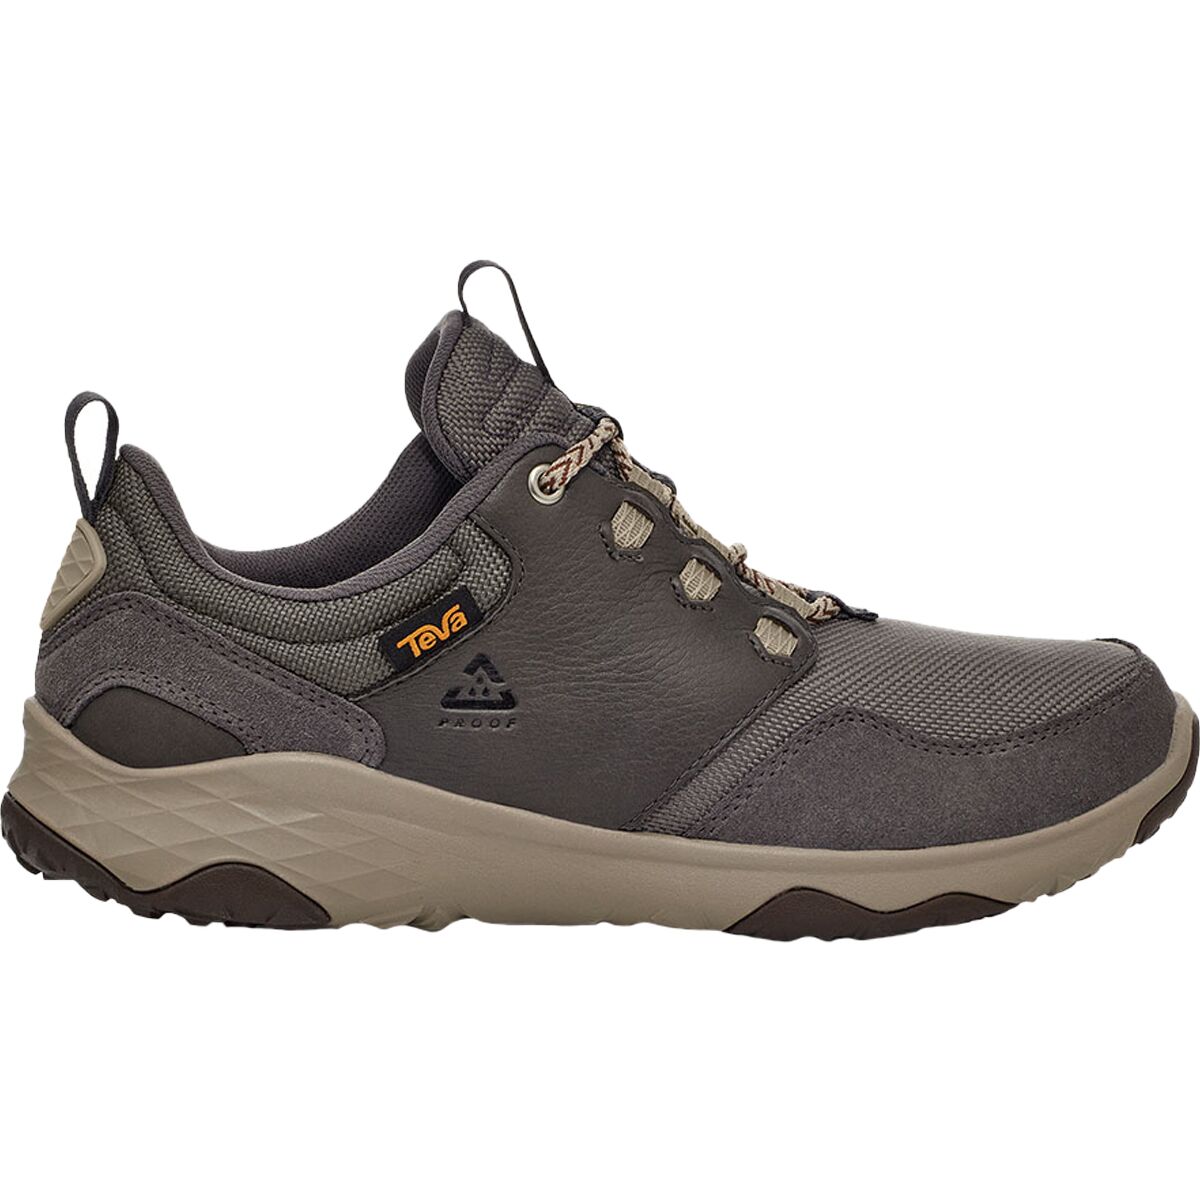 Canyonview RP Hiking Shoe - Men's by Teva | US-Parks.com